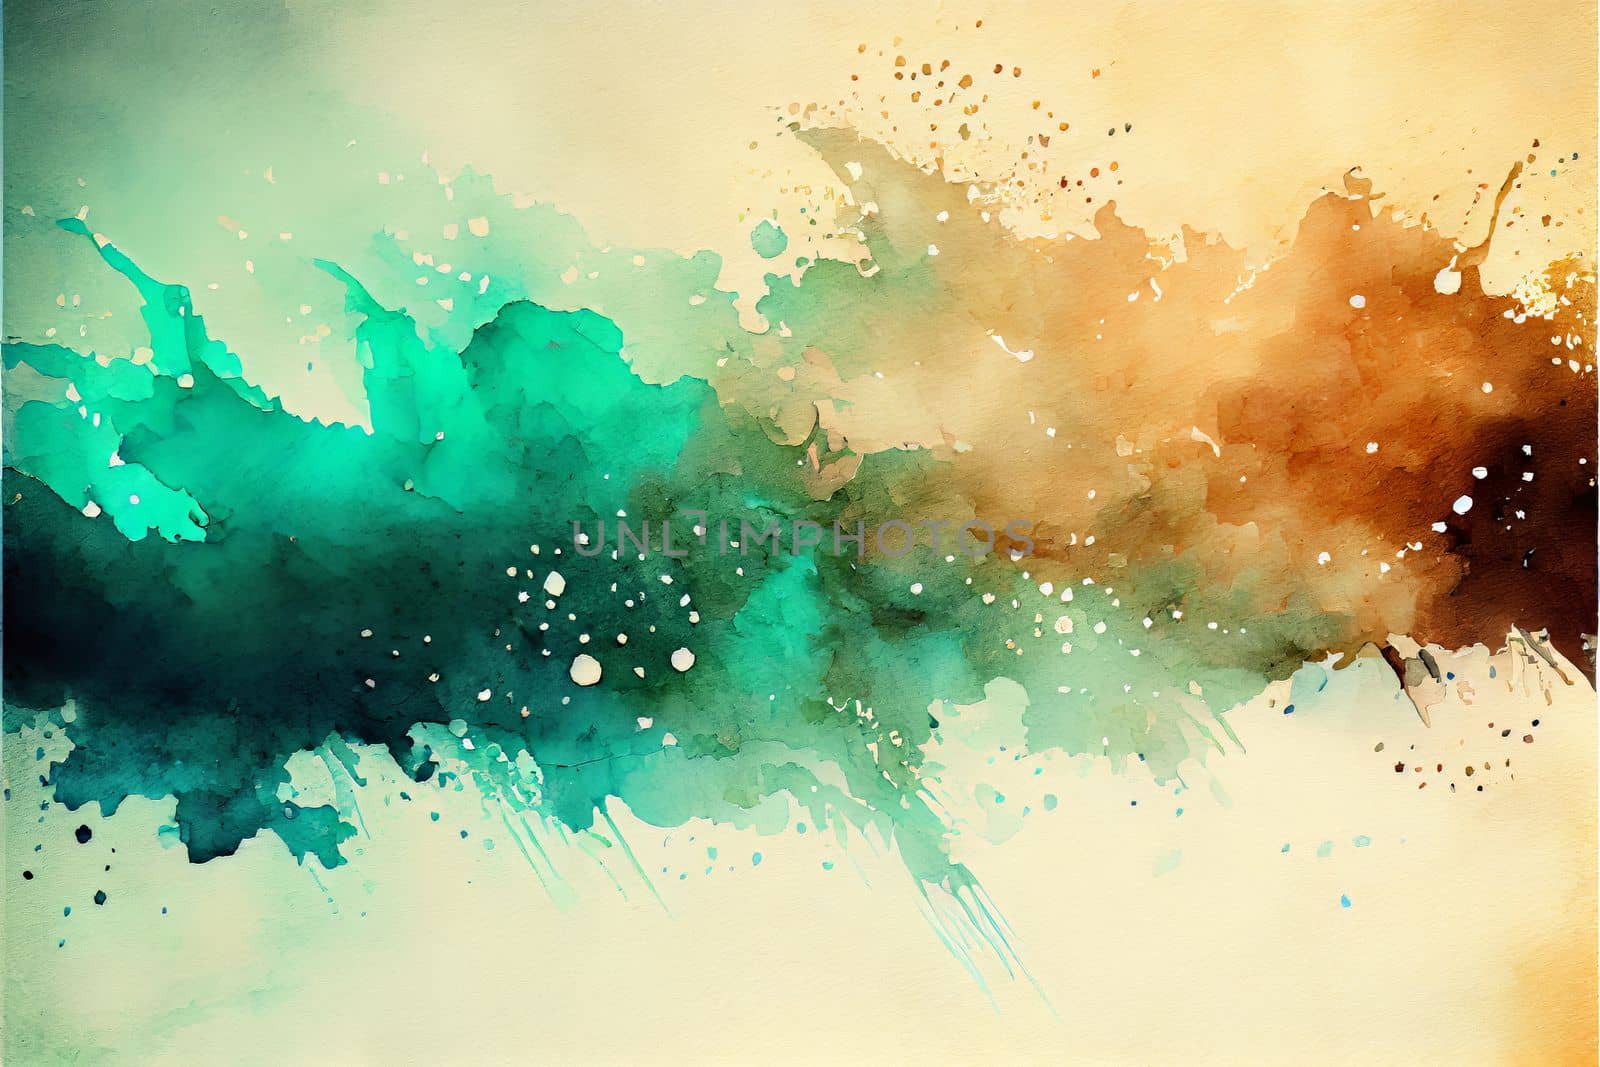 Abstract watercolor background with blurry spots of green and brown by Zakharova